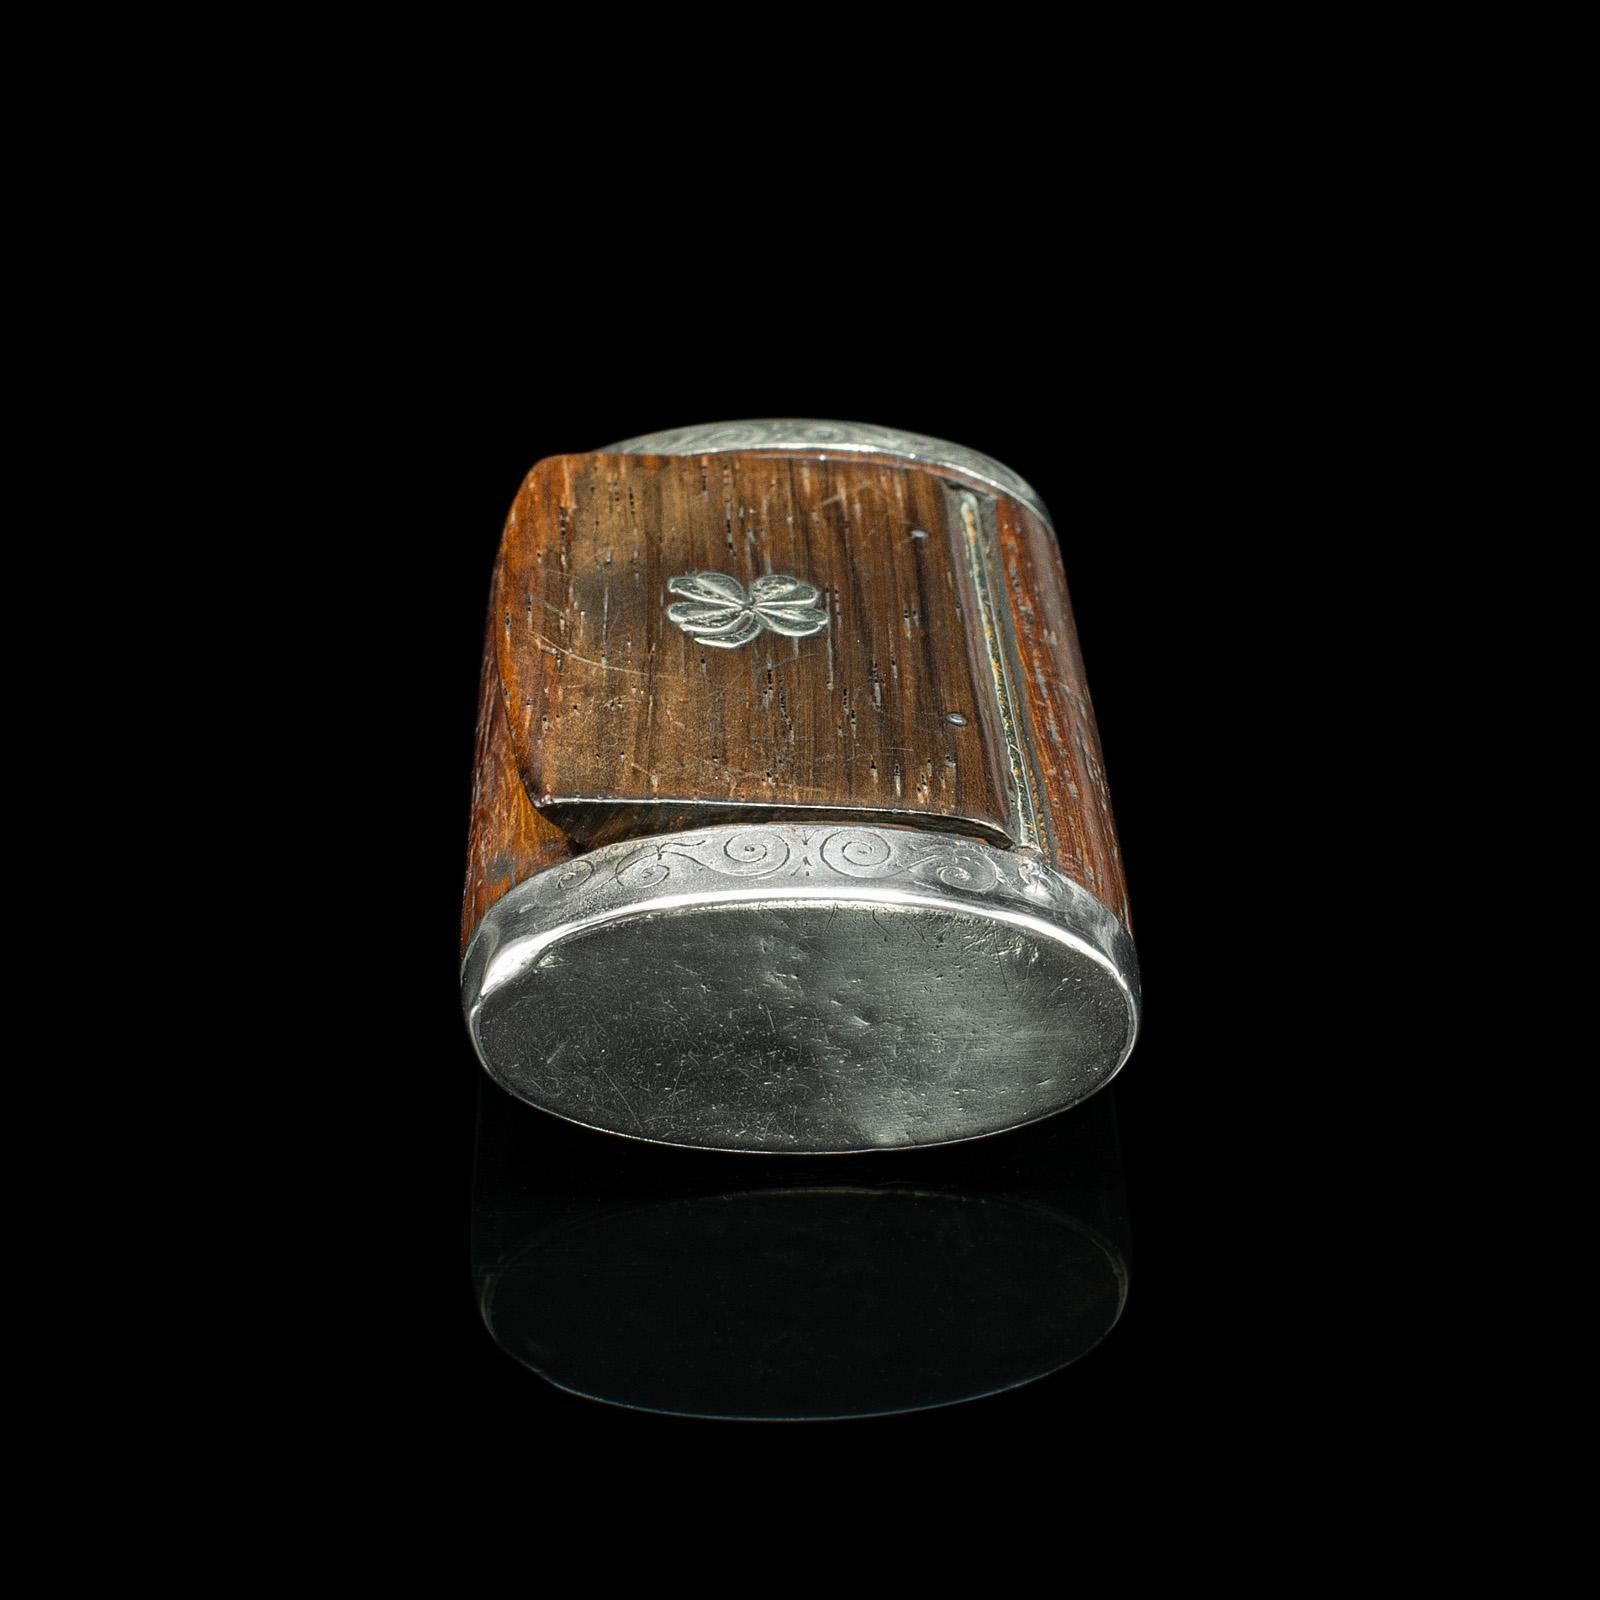 Small Antique Pill Box, French, Walnut, Silver Plate, Pocket Case, Victorian For Sale 3